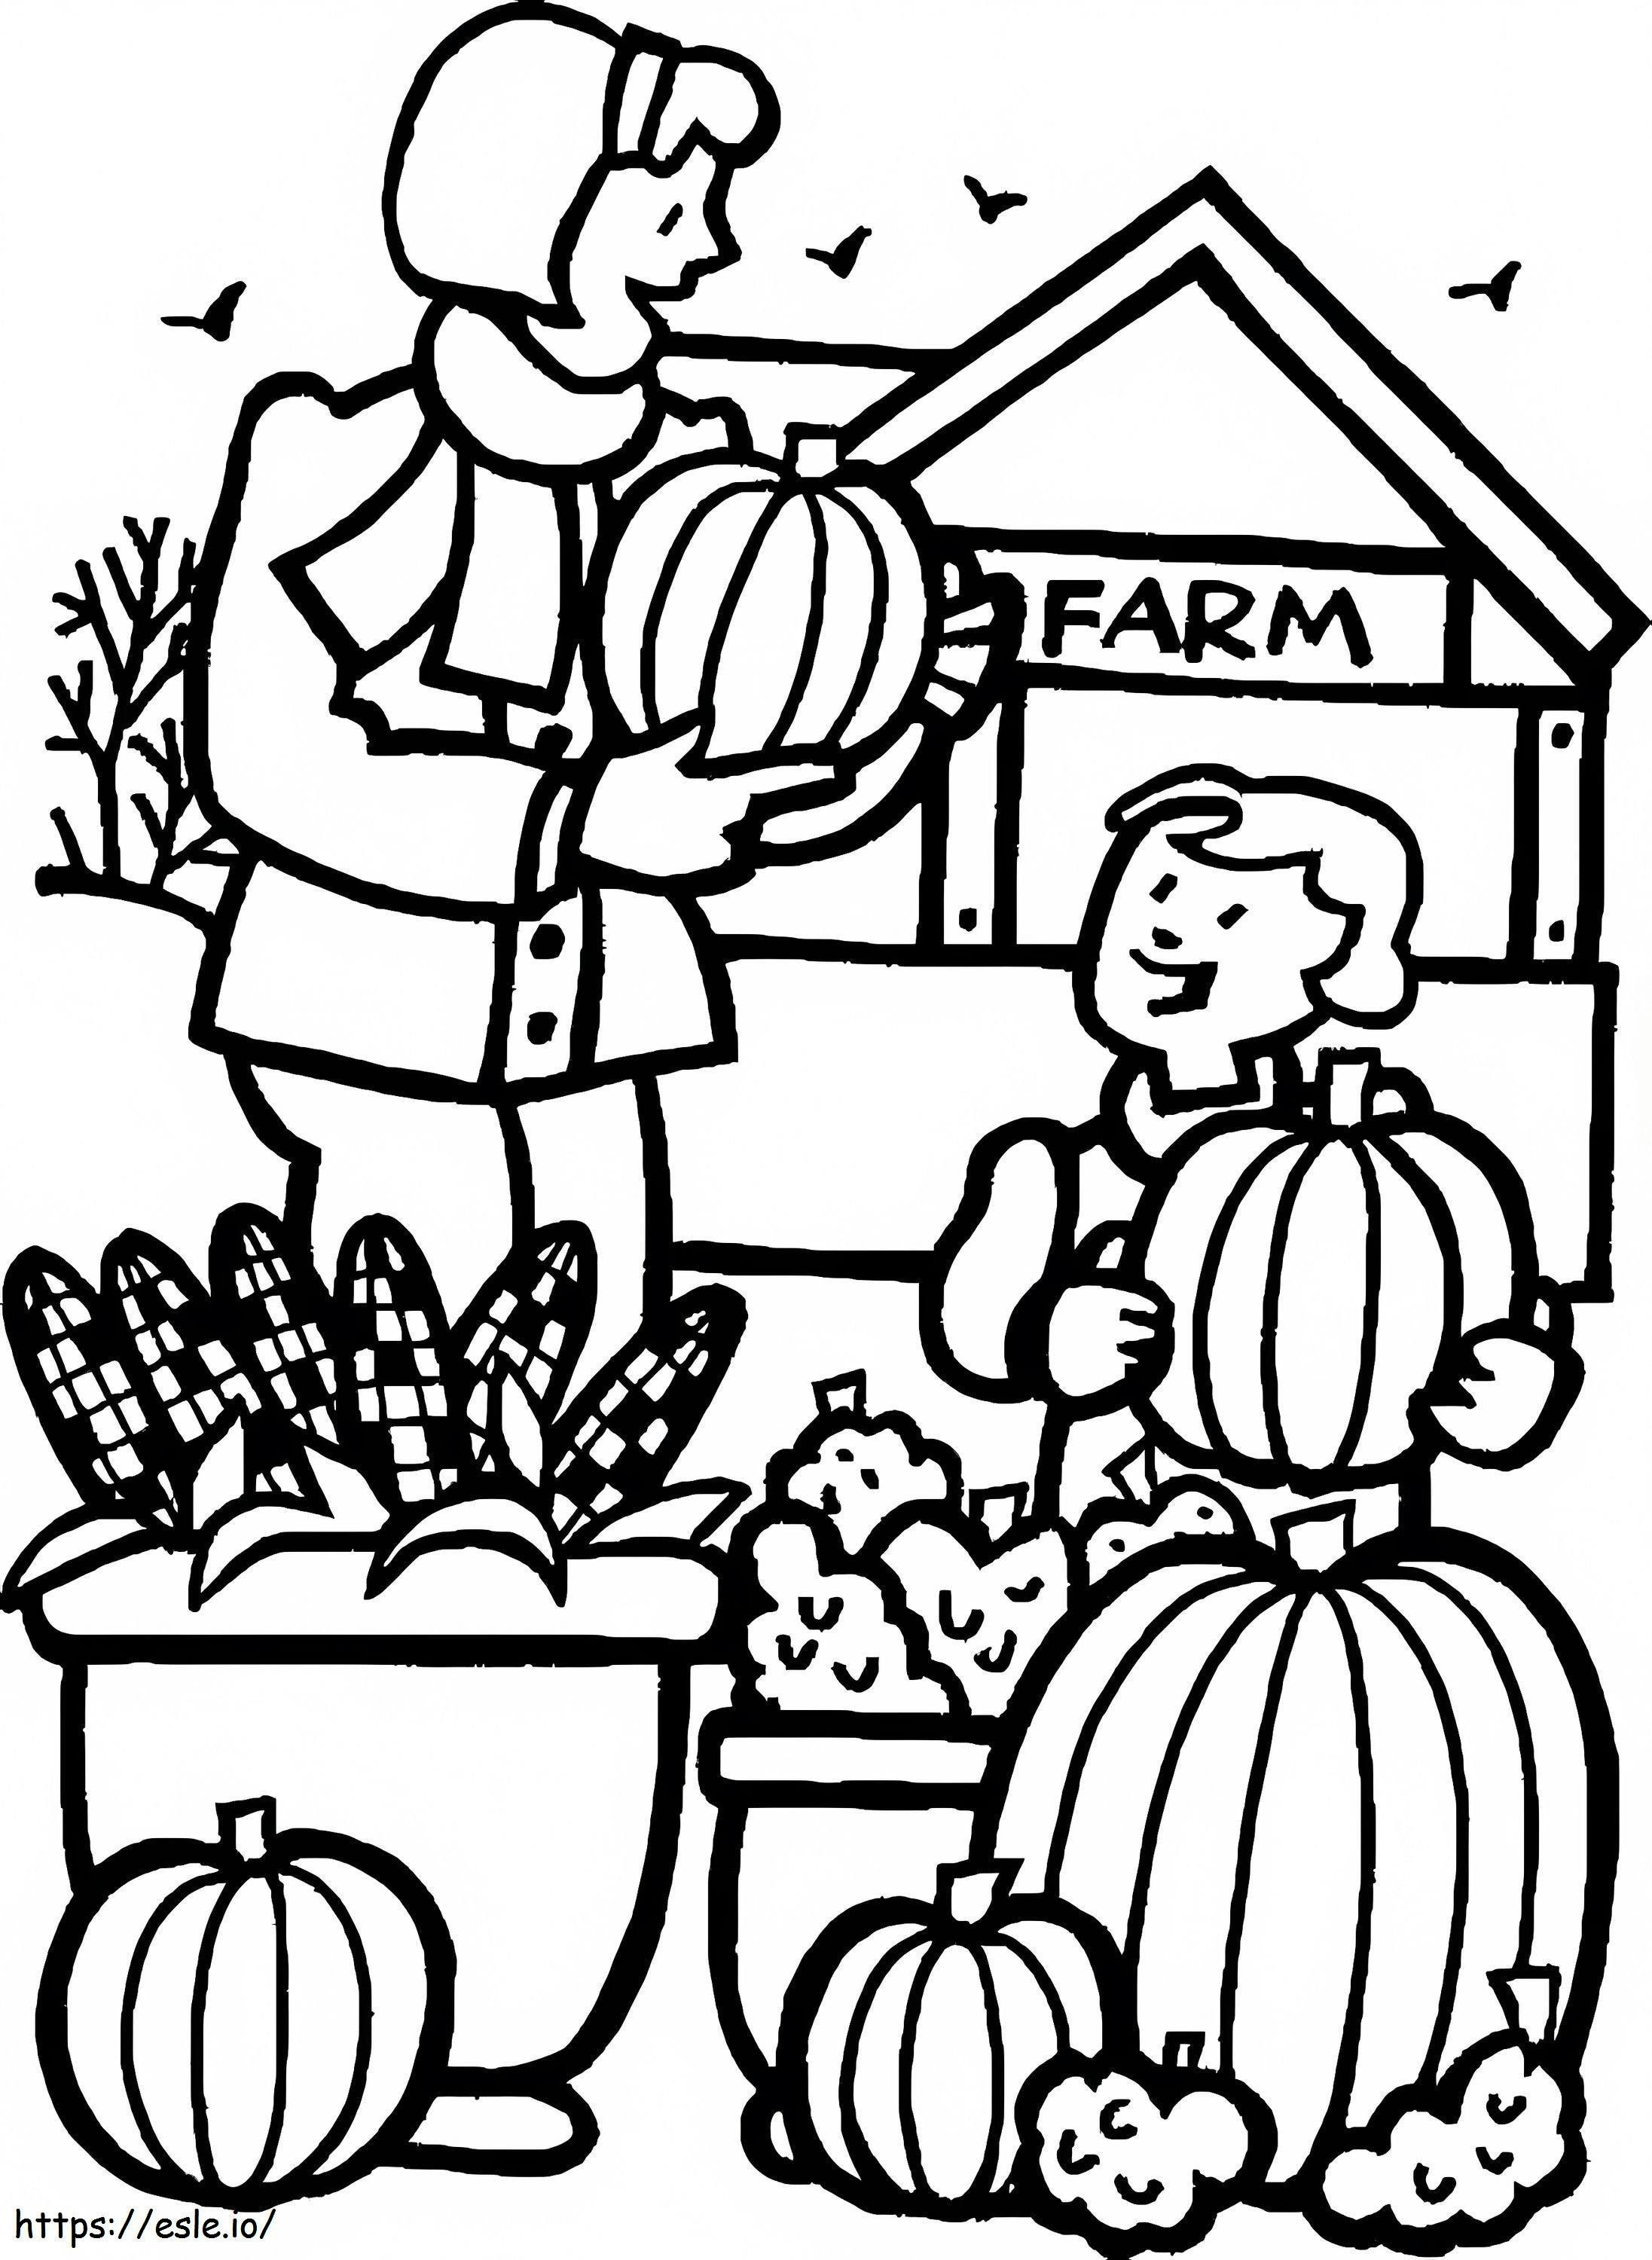 Pumpkin Patch For Kids coloring page